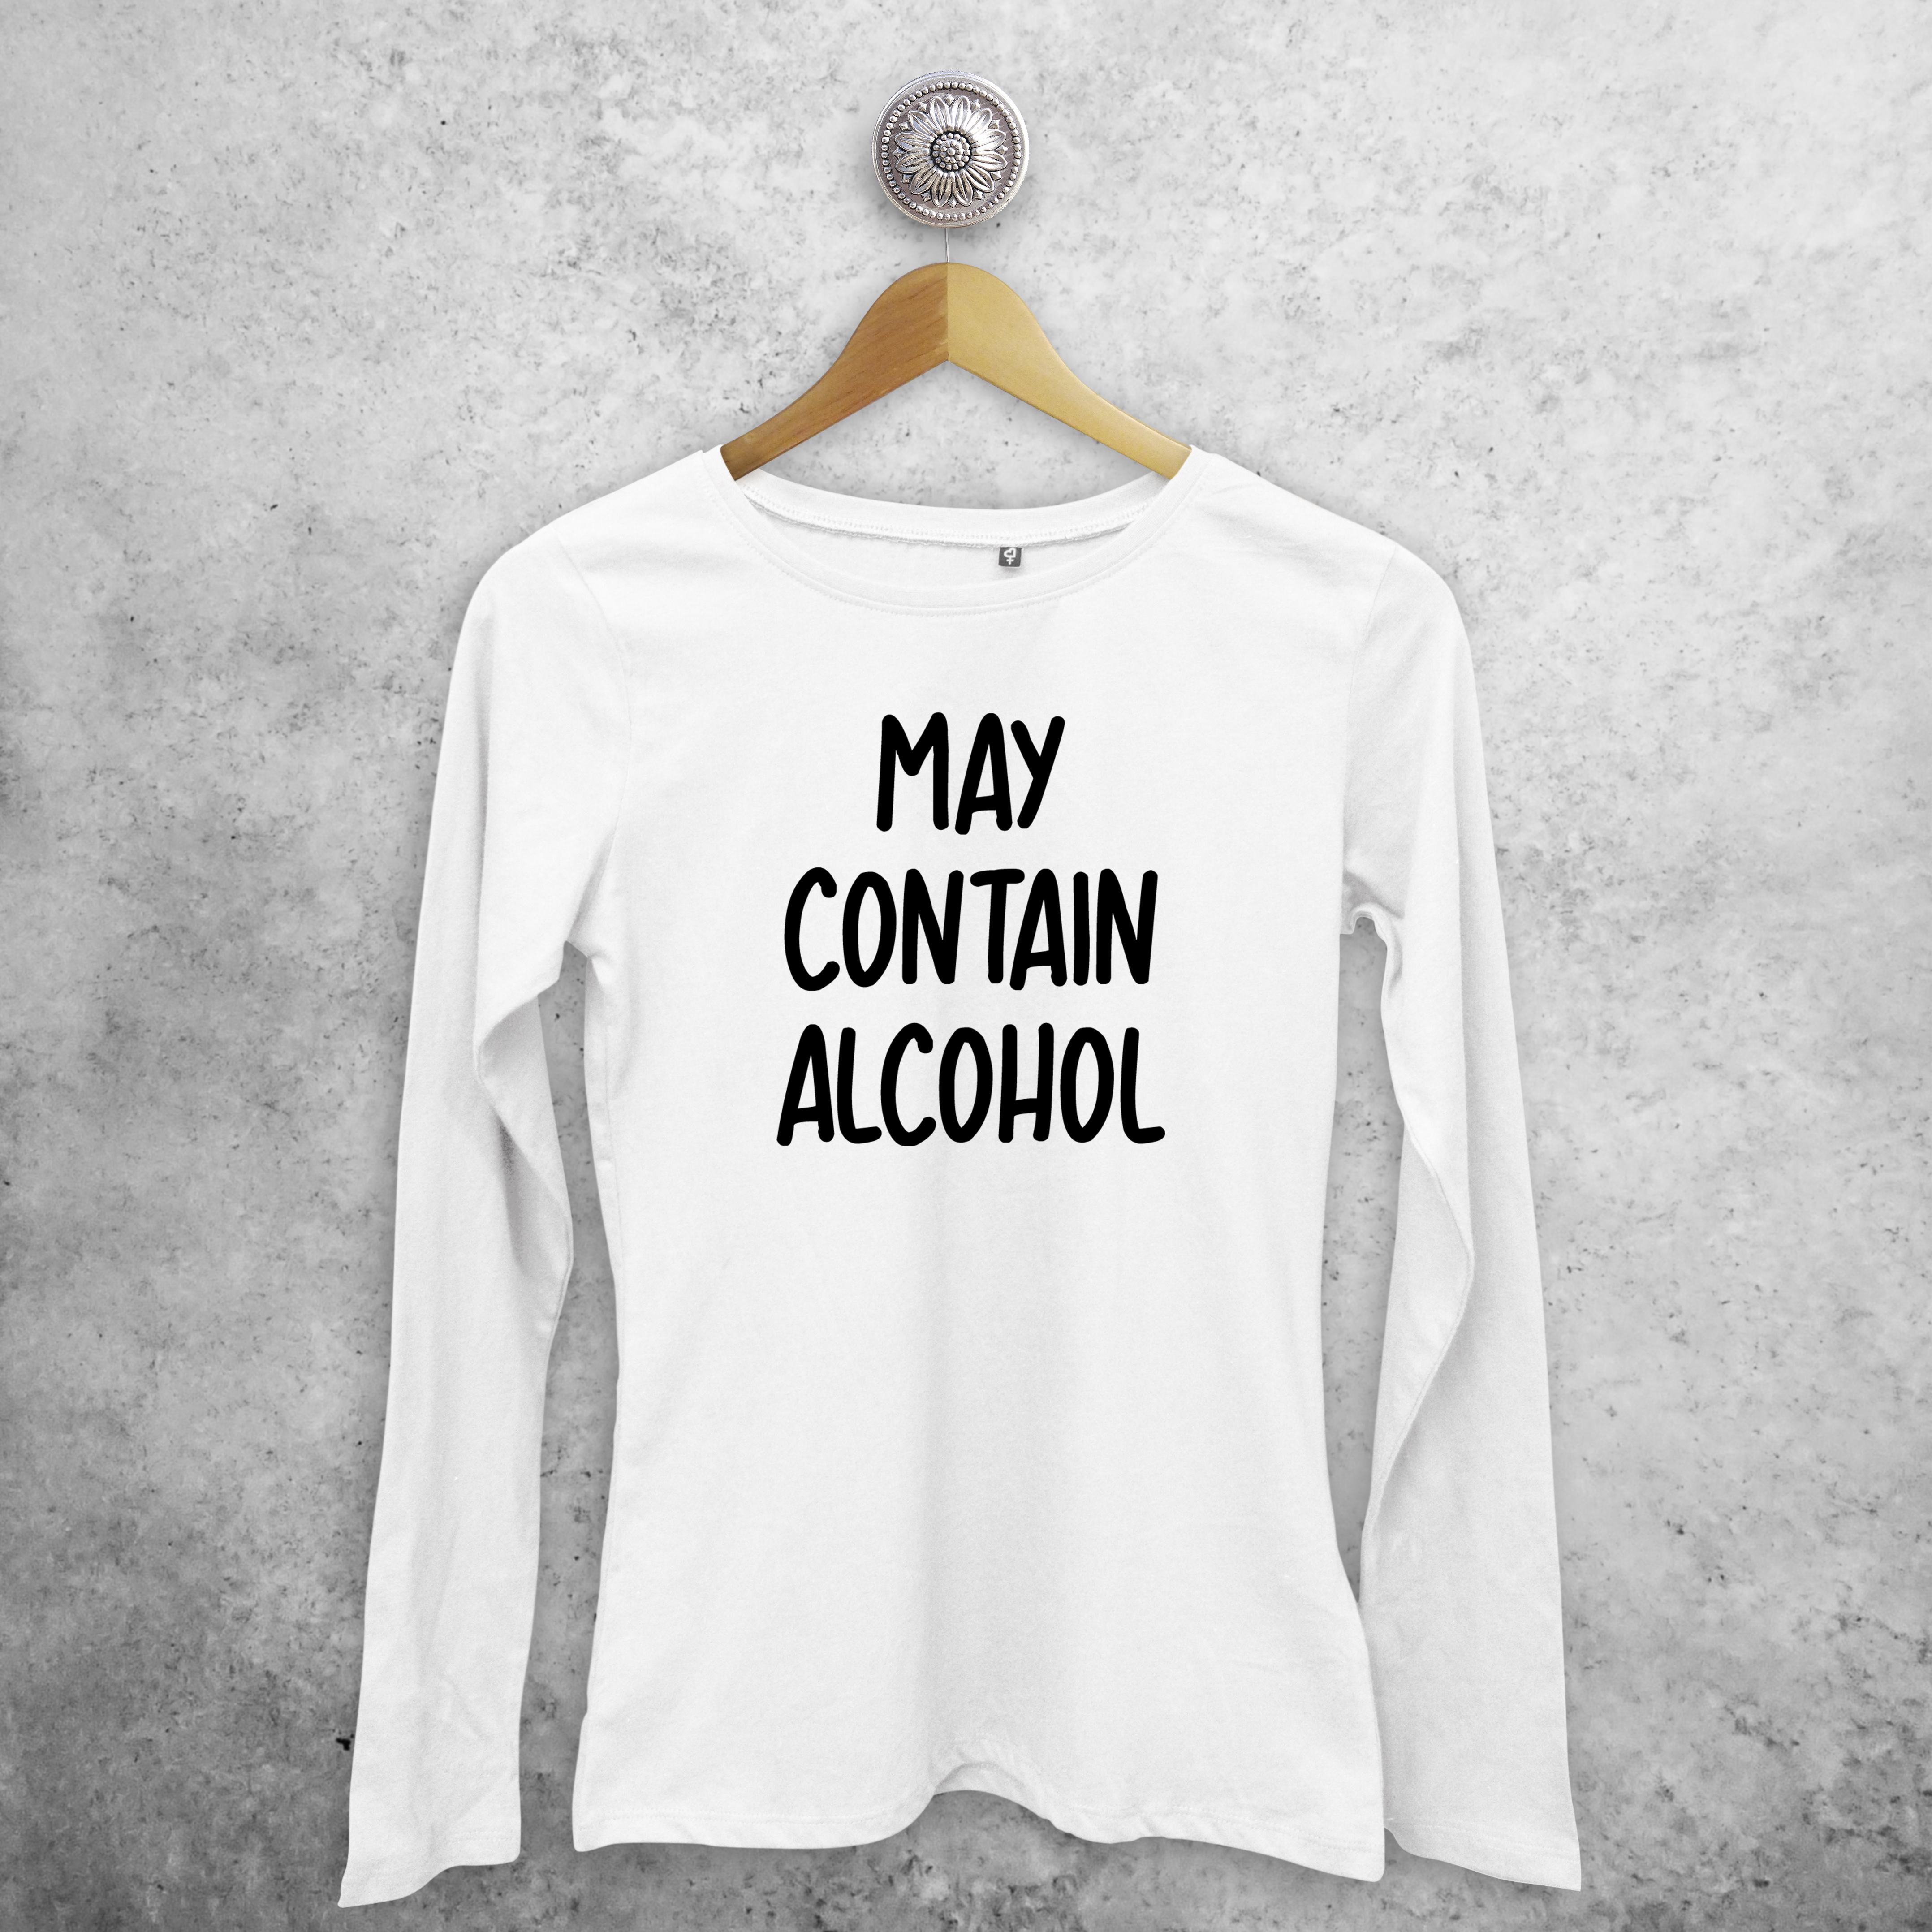 'May contain alcohol' adult longsleeve shirt